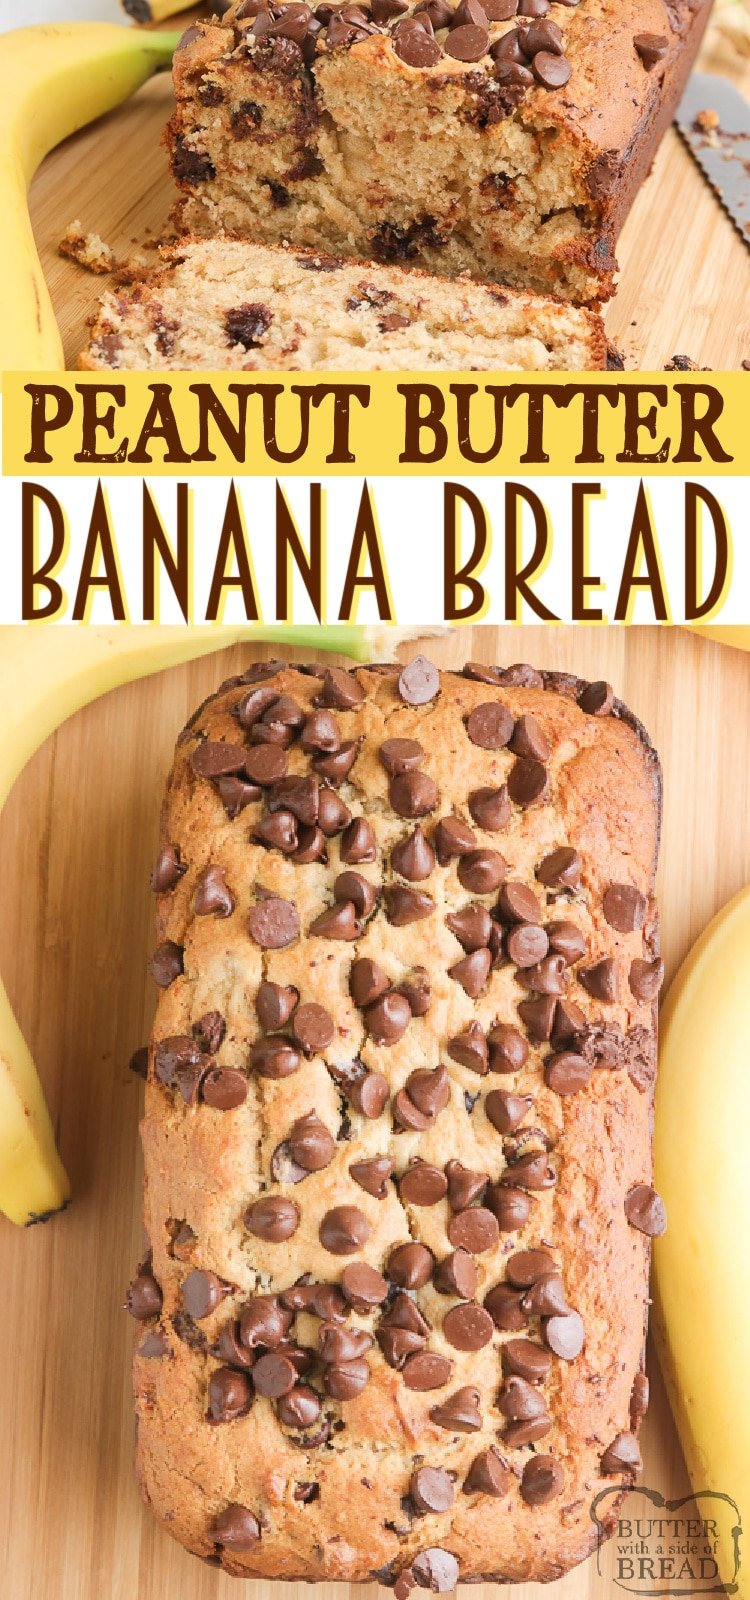 Peanut Butter Banana Bread made with ripe bananas, peanut butter, and chocolate chips! A delicious variation on the classic banana bread recipe.